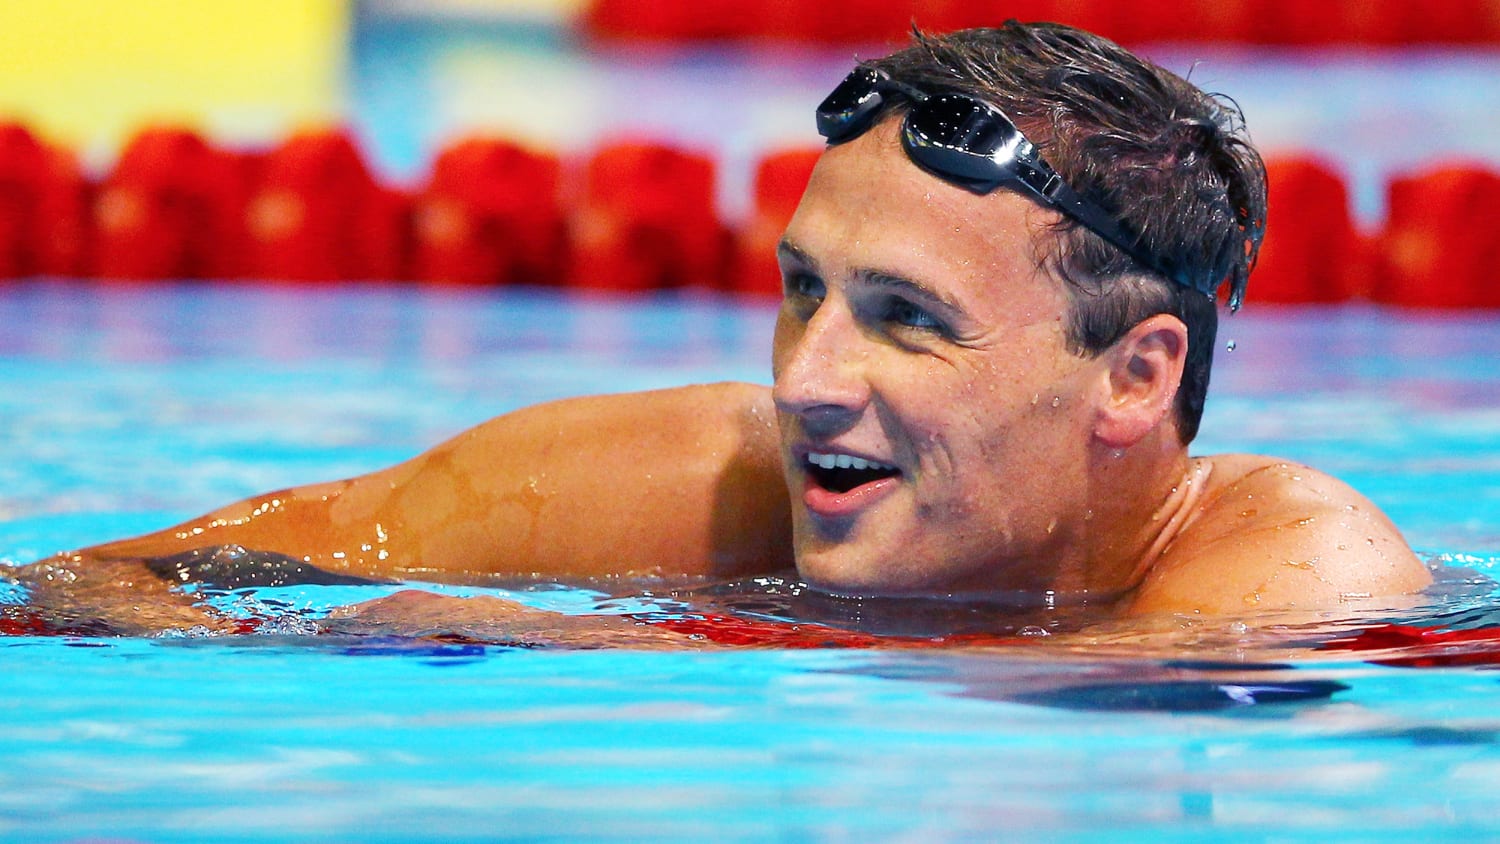 Olympic swimmer and gold medalist Ryan Lochte is about to turn heads in Rio